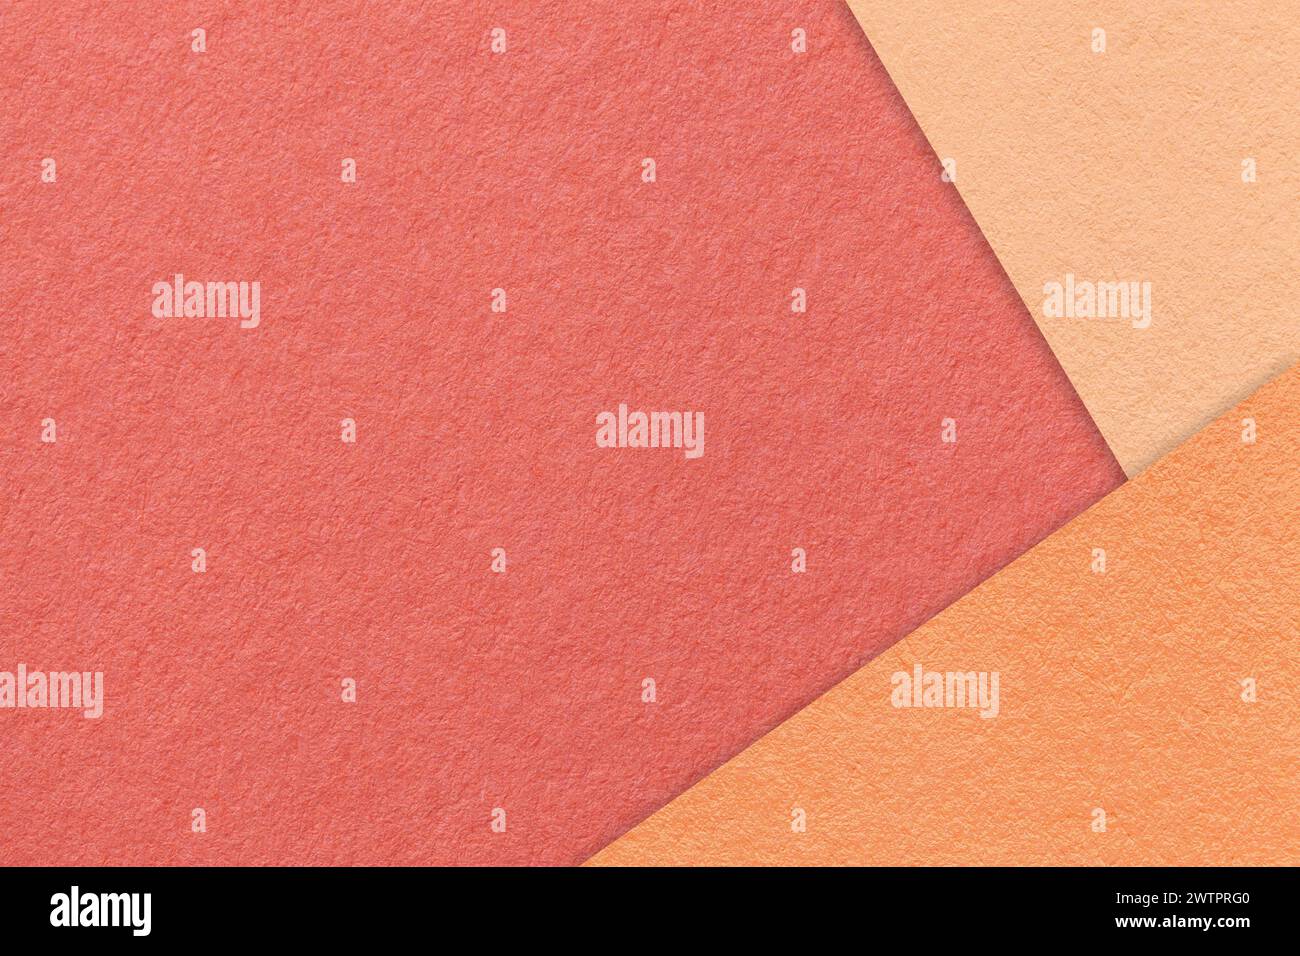 Texture of craft red color paper background with peach fuzz and coral border. Vintage abstract maroon cardboard. Presentation template and mockup with Stock Photo